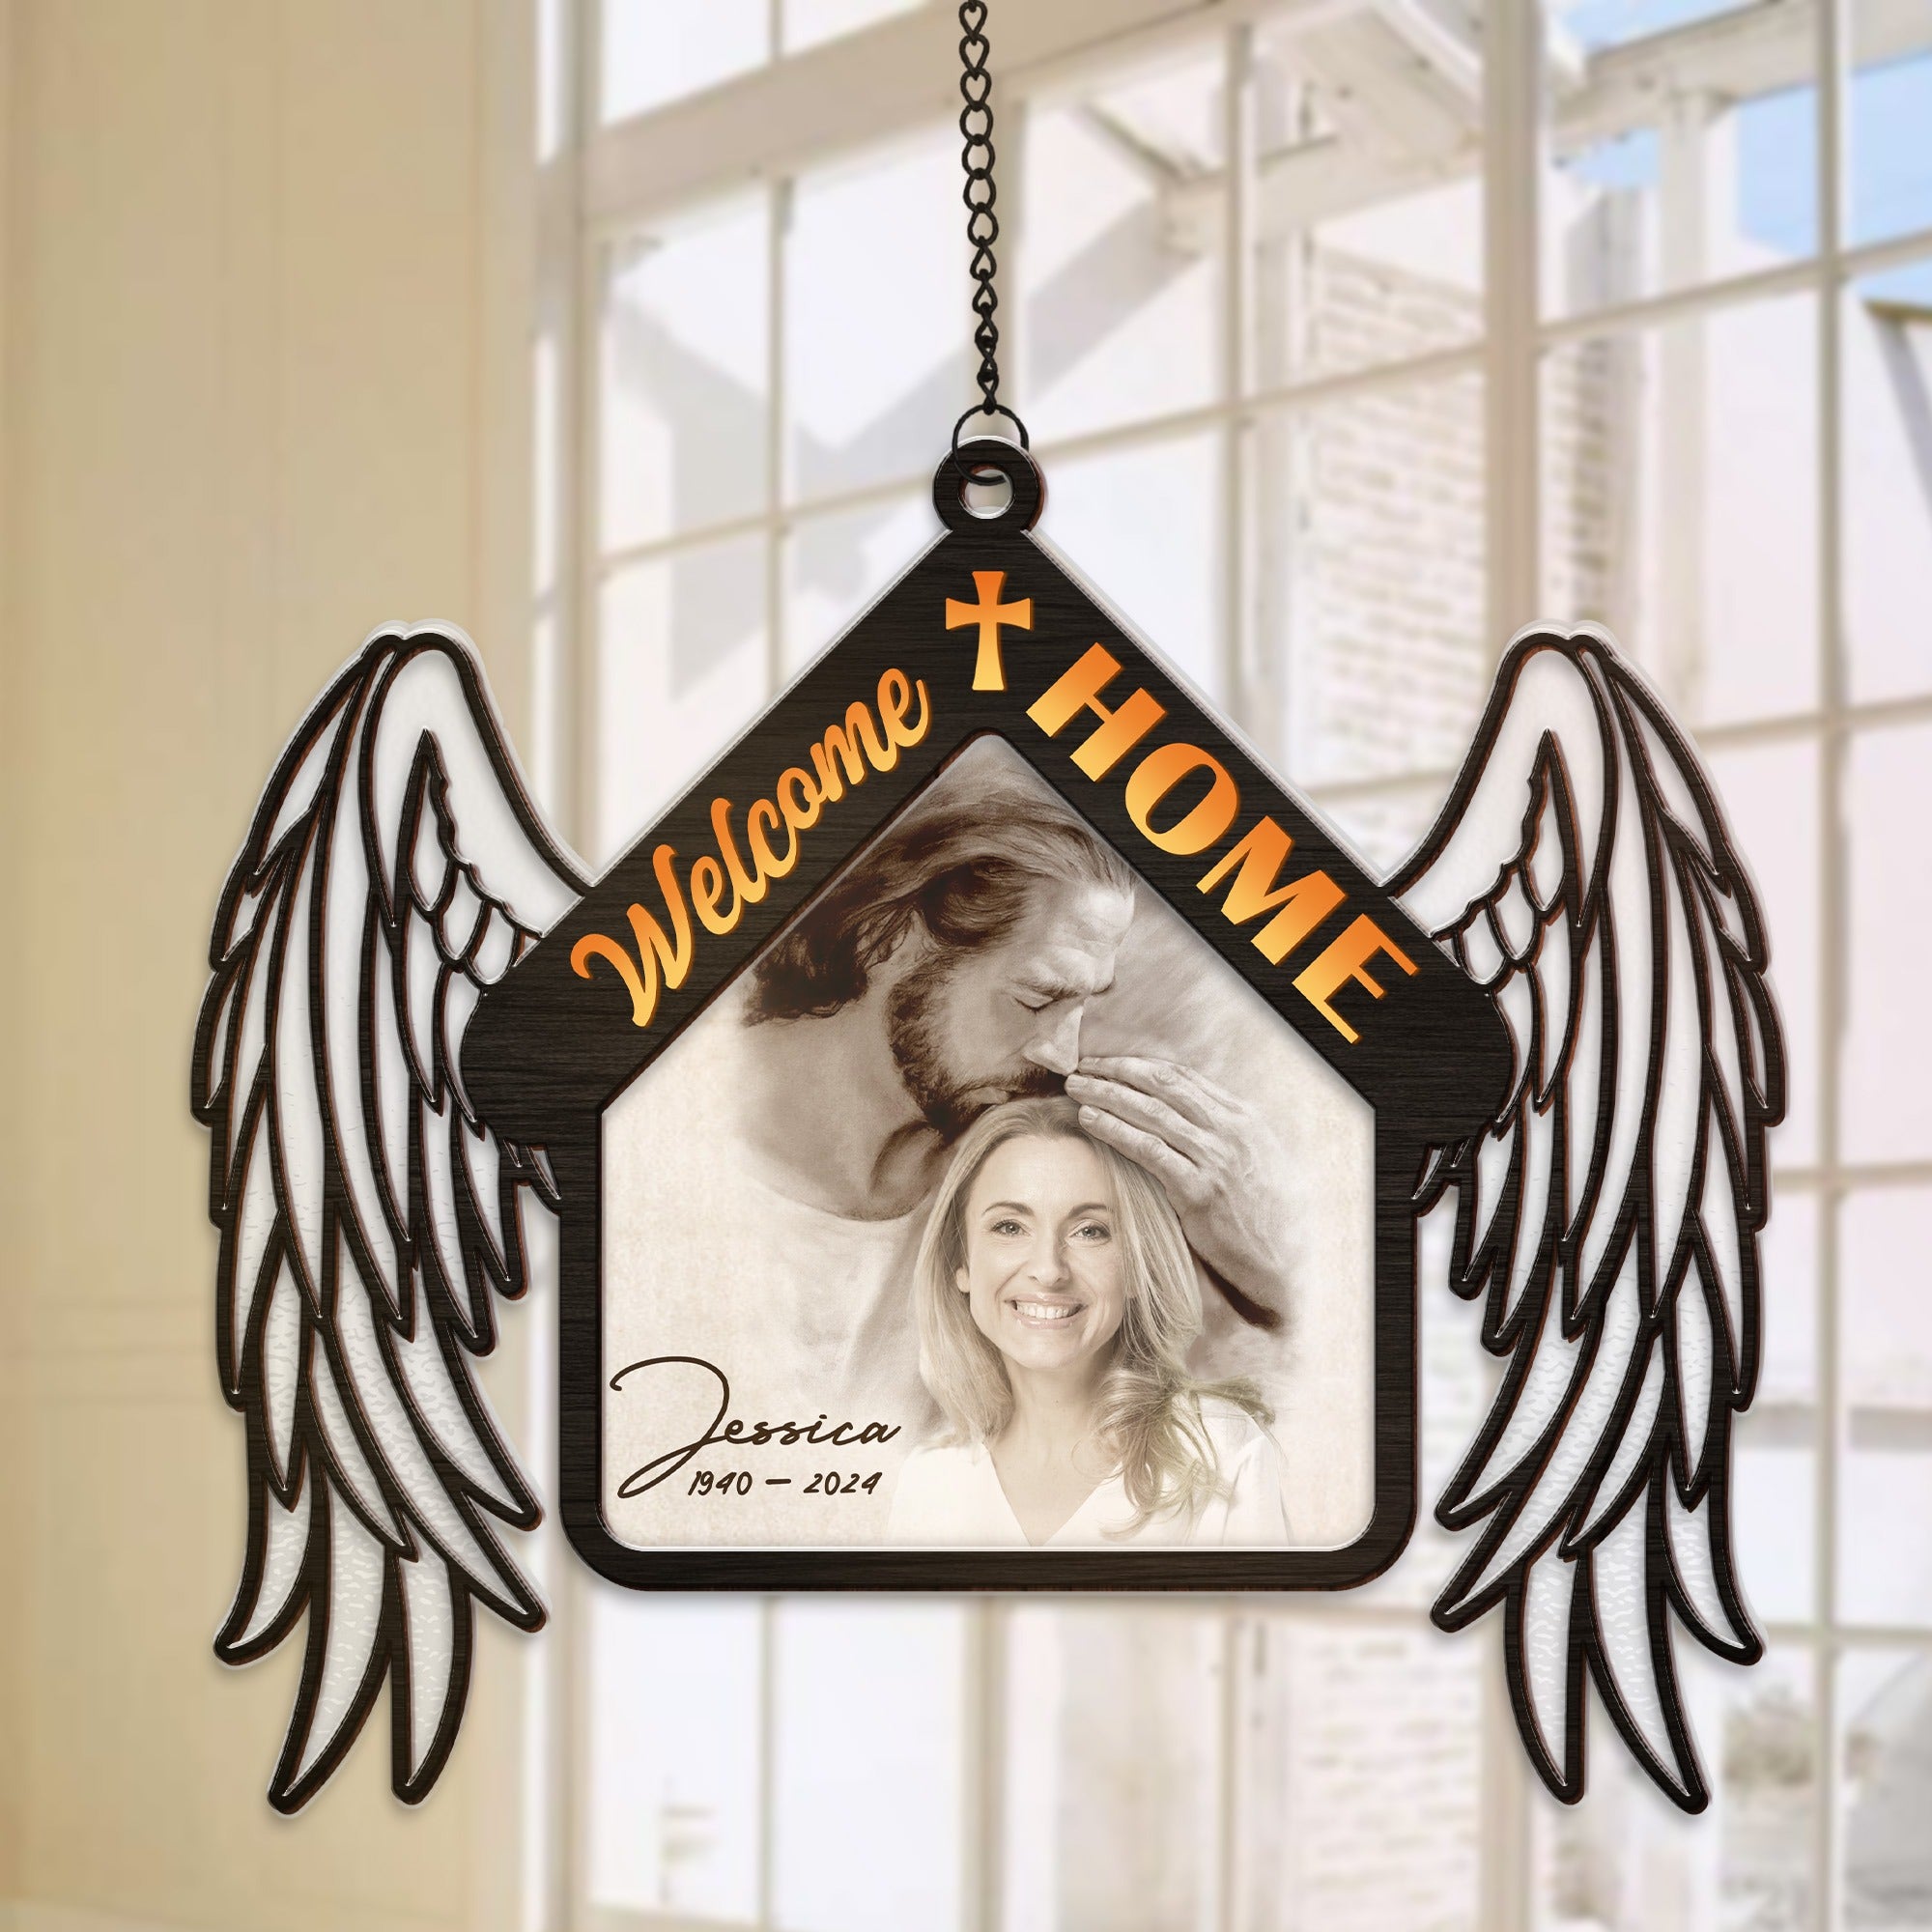 Personalized Photo Safe In Arms Of Jesus Welcome Home Jesus Hanging Suncatcher Ornament